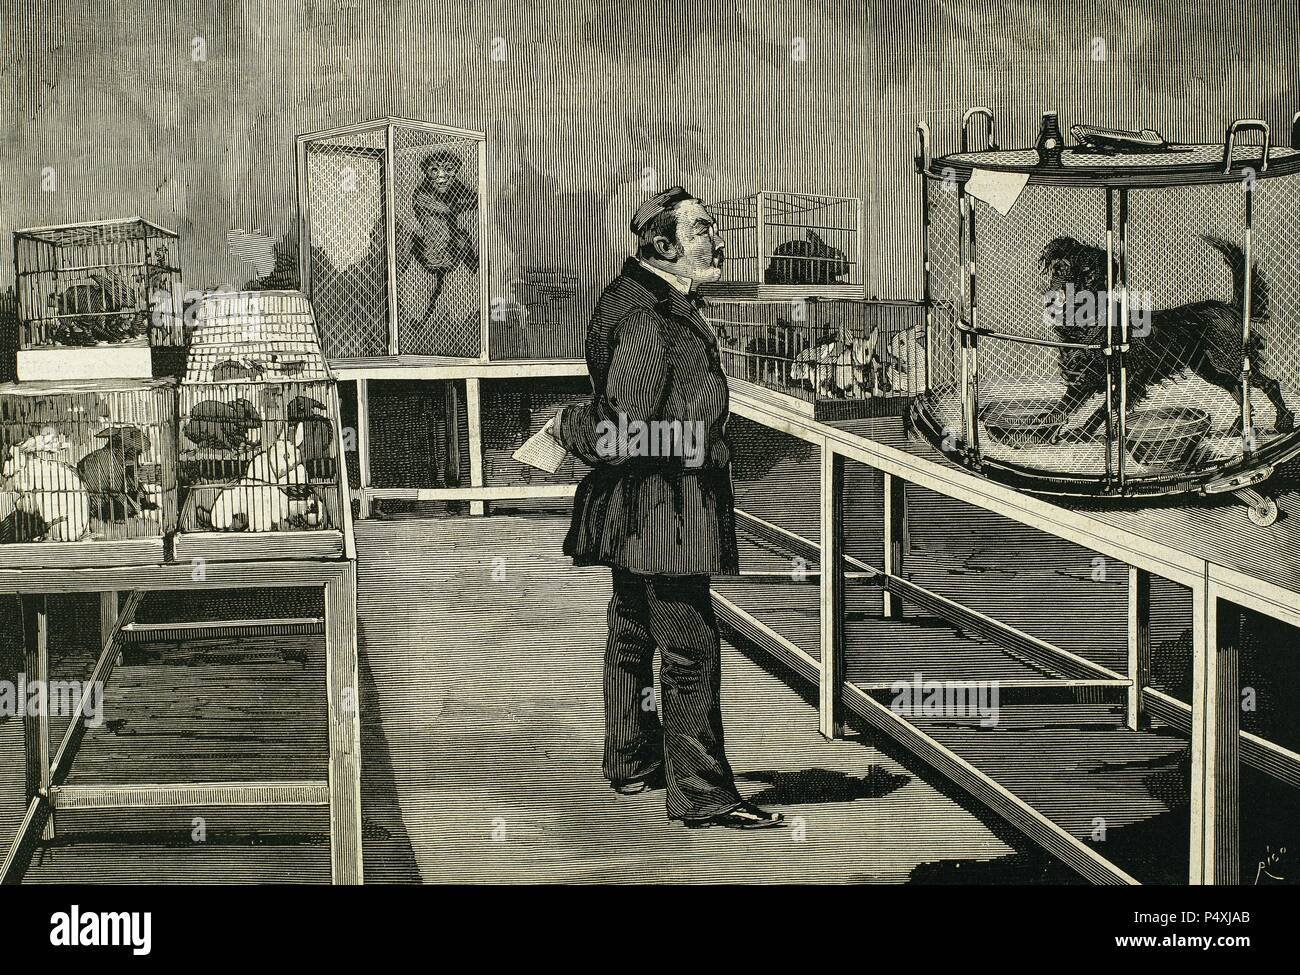 PASTEUR, Louis (1822-1895) French chemist and bacteriologist. Pasteur observes the effects of inoculation of rabies virus, Paris. Engraving by Rico. Stock Photo